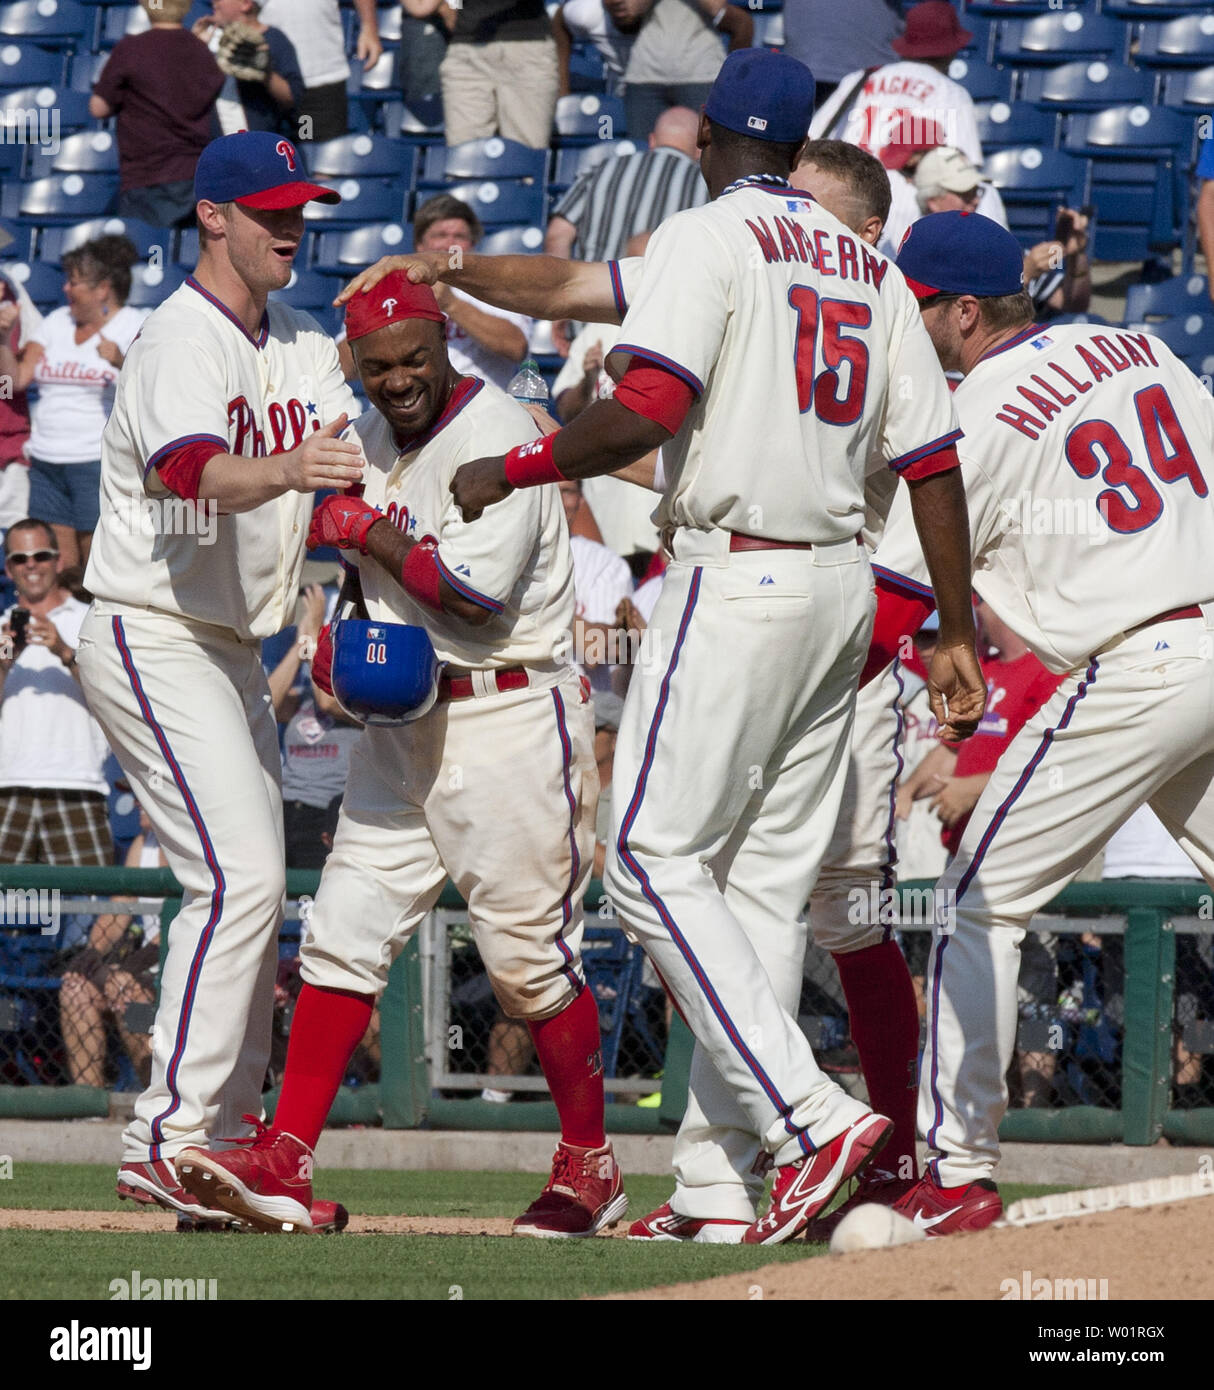 Philadelphia Phillies teammates congratulate Jimmy Rollins after he hit an RBI in the 12th inning against the San Francisco Giants at Citizens Bank Park in Philadelphia on July 22, 2012 winning the game 4-3. UPI/John Anderson Stock Photo